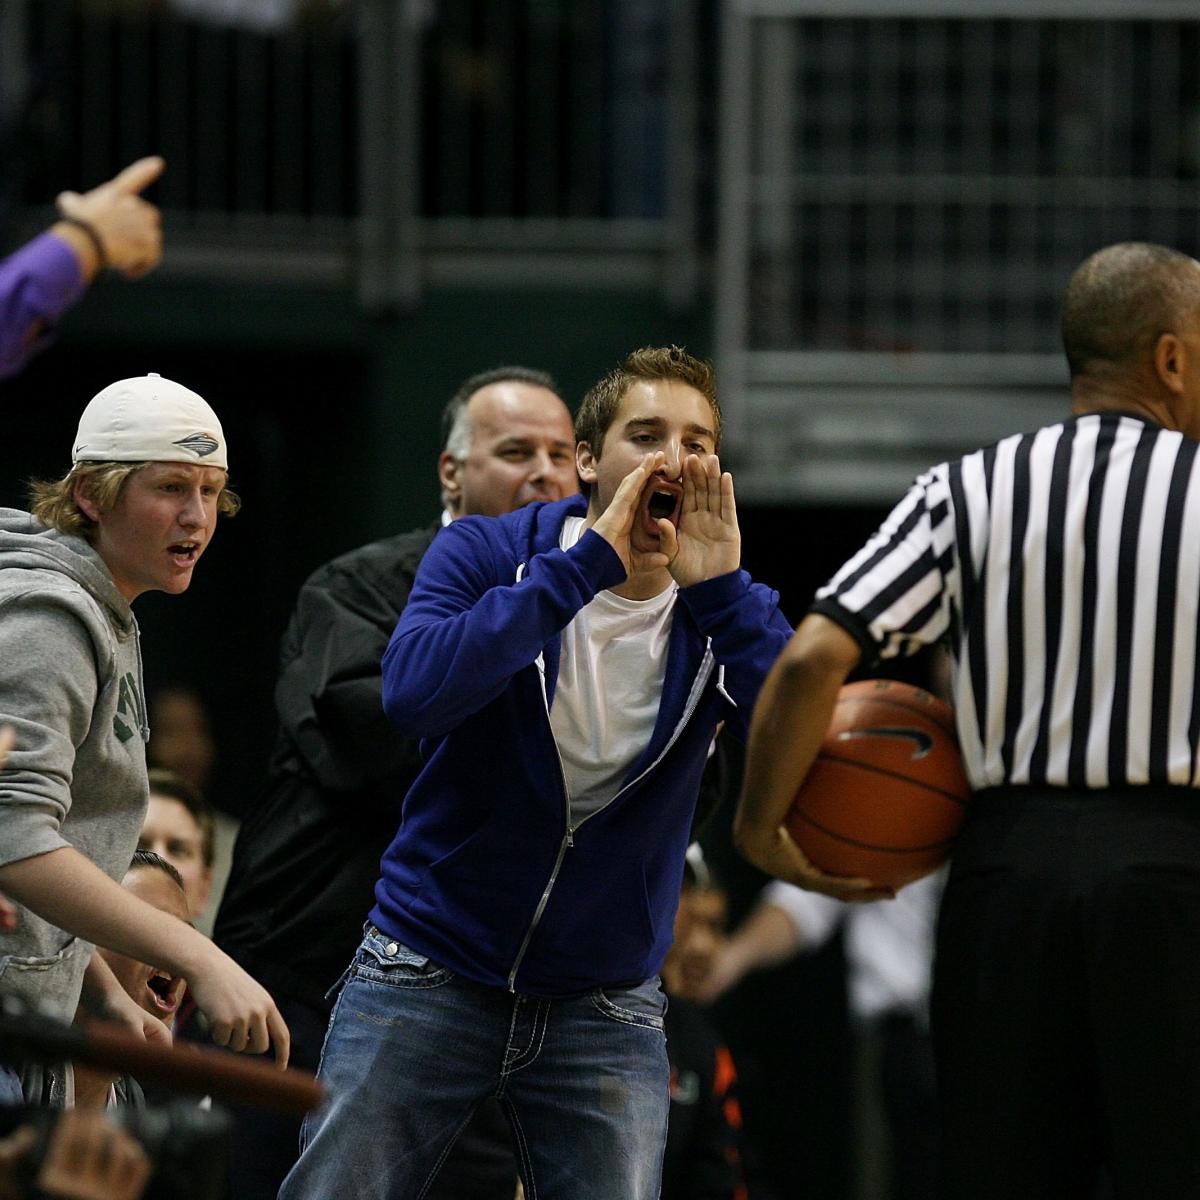 NCAA Referee's Ejection of Fans Belies a Greater Problem with Sports